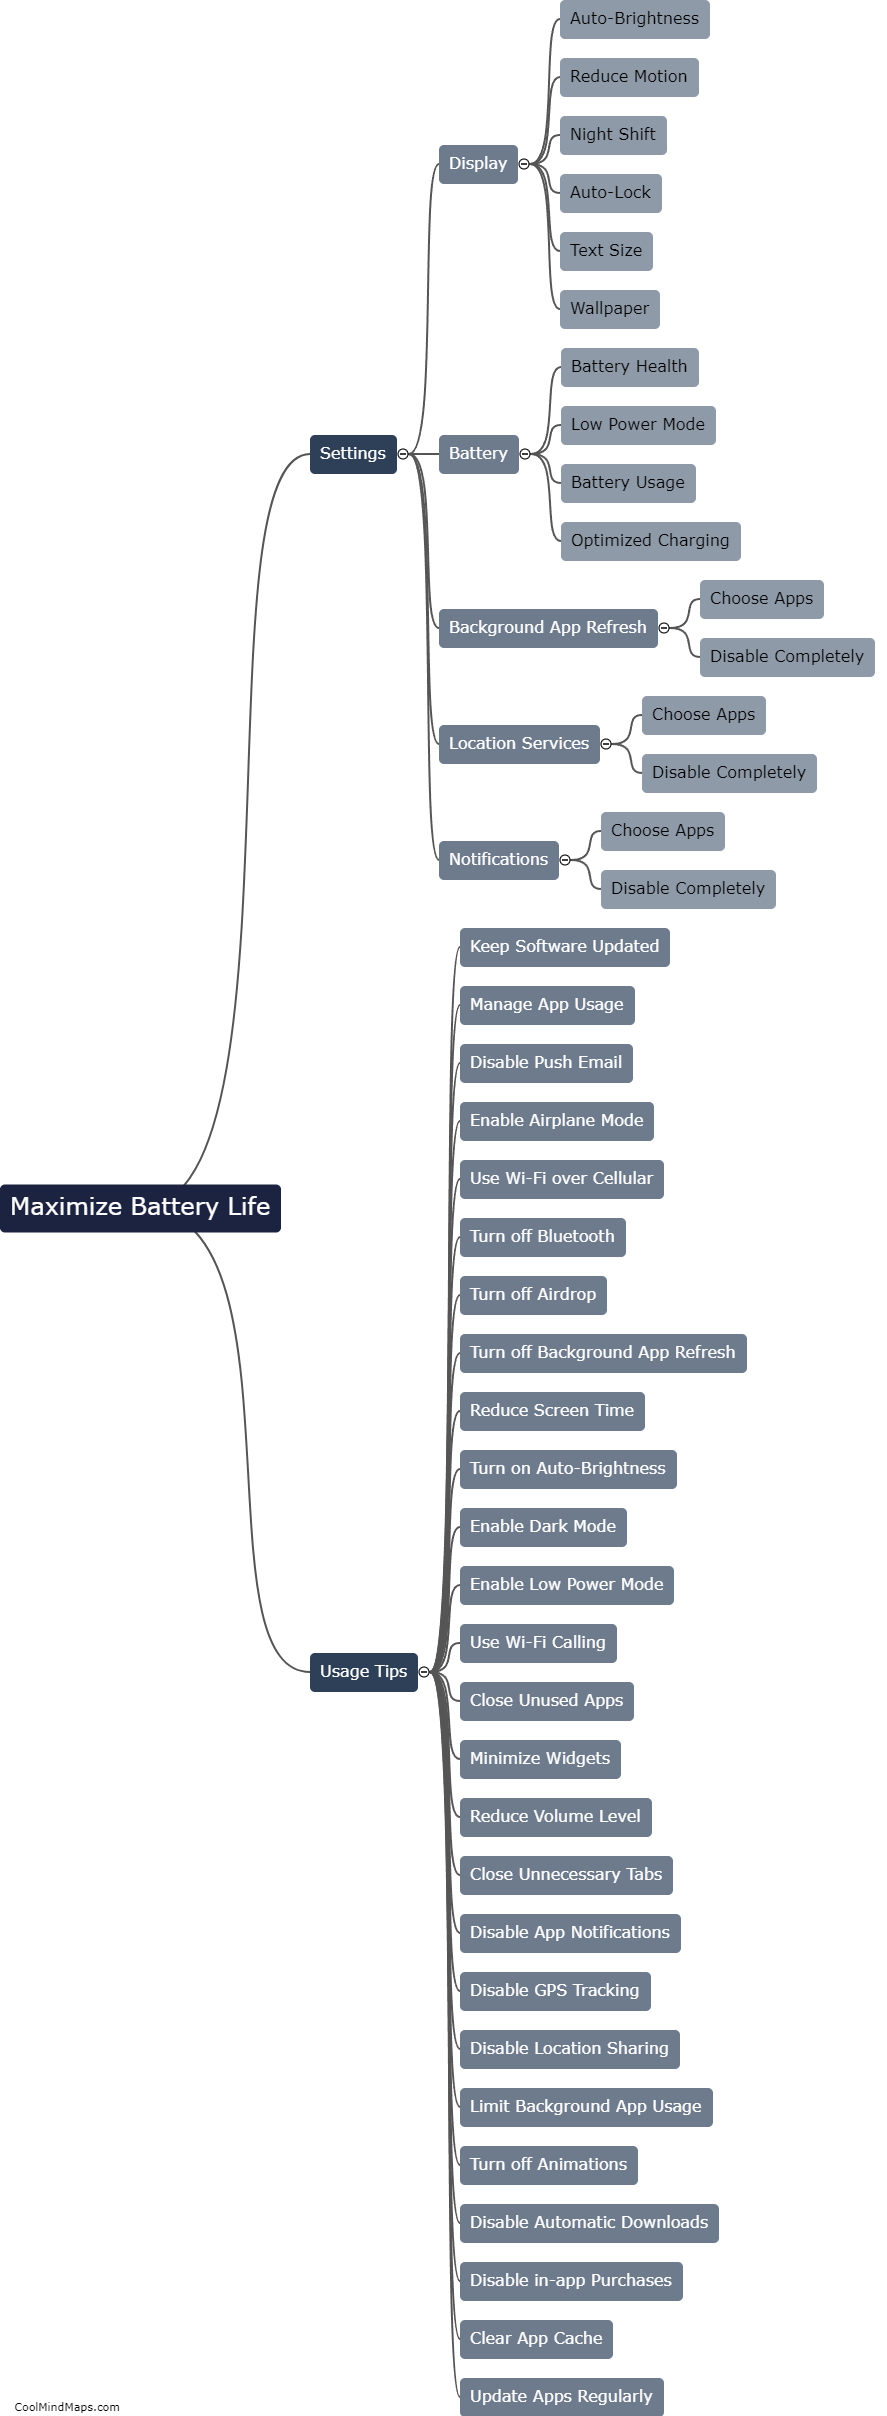 How to maximize battery life on an iPhone?